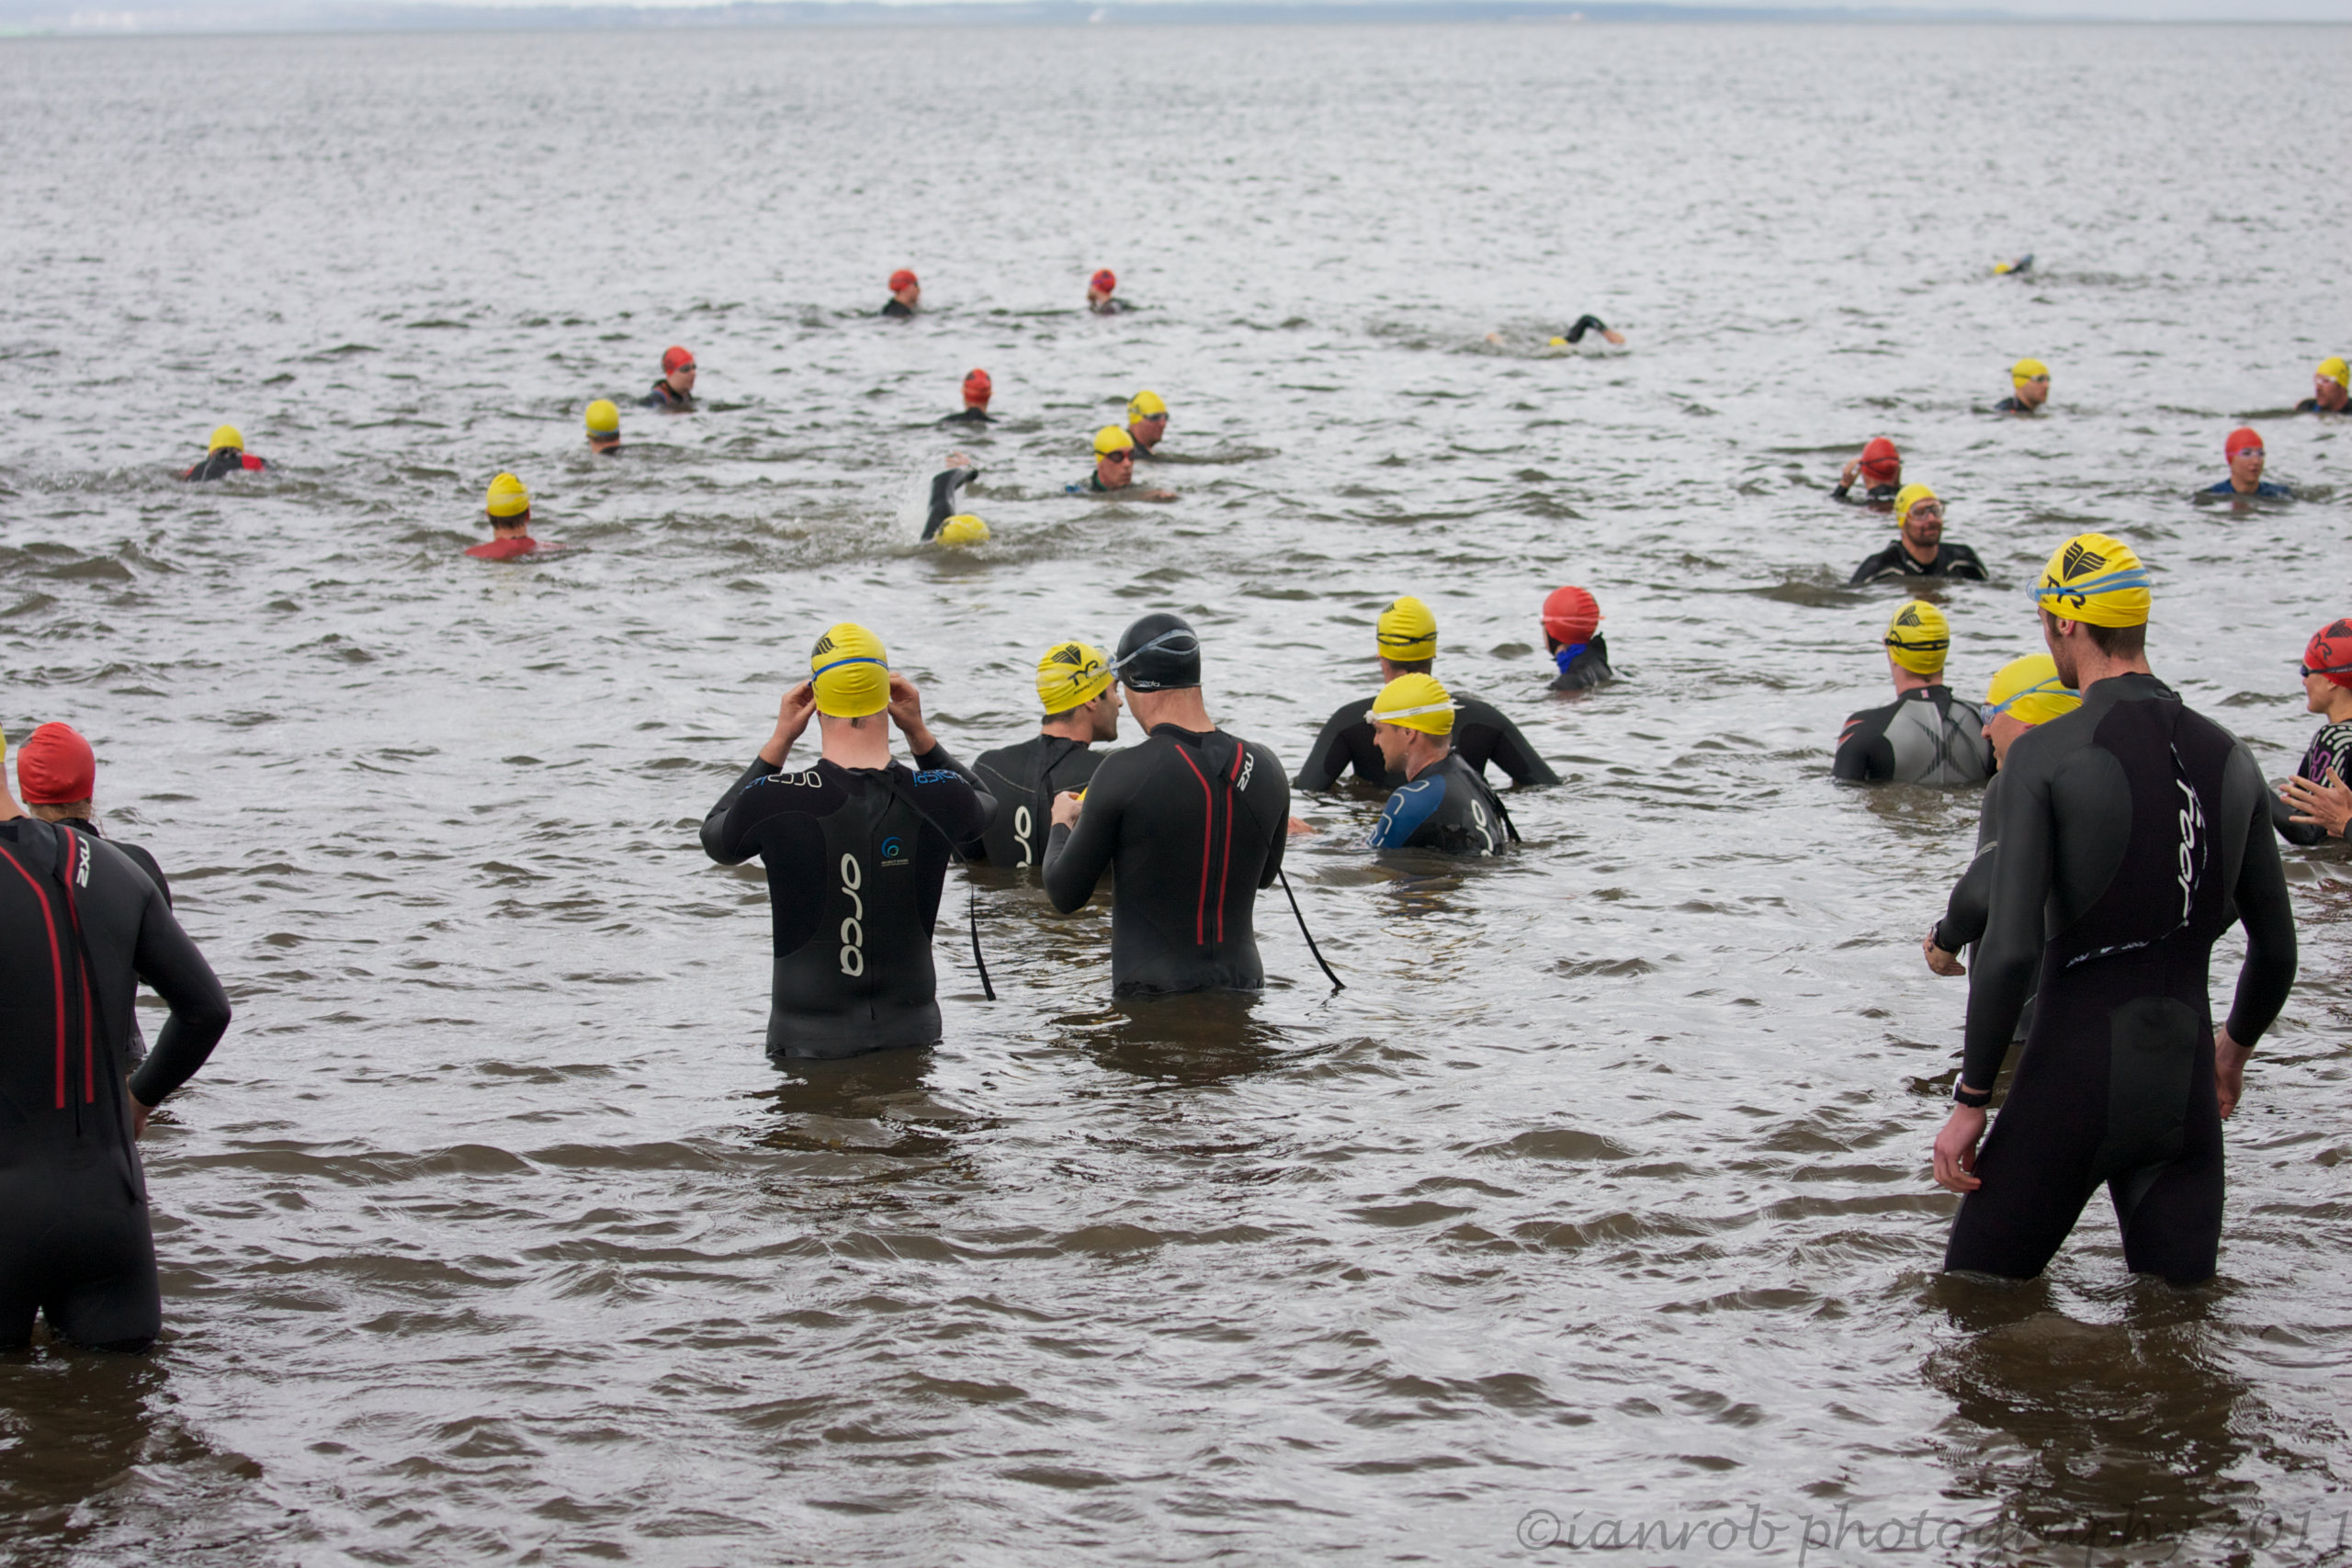 Open Water Swimming: All Year Round